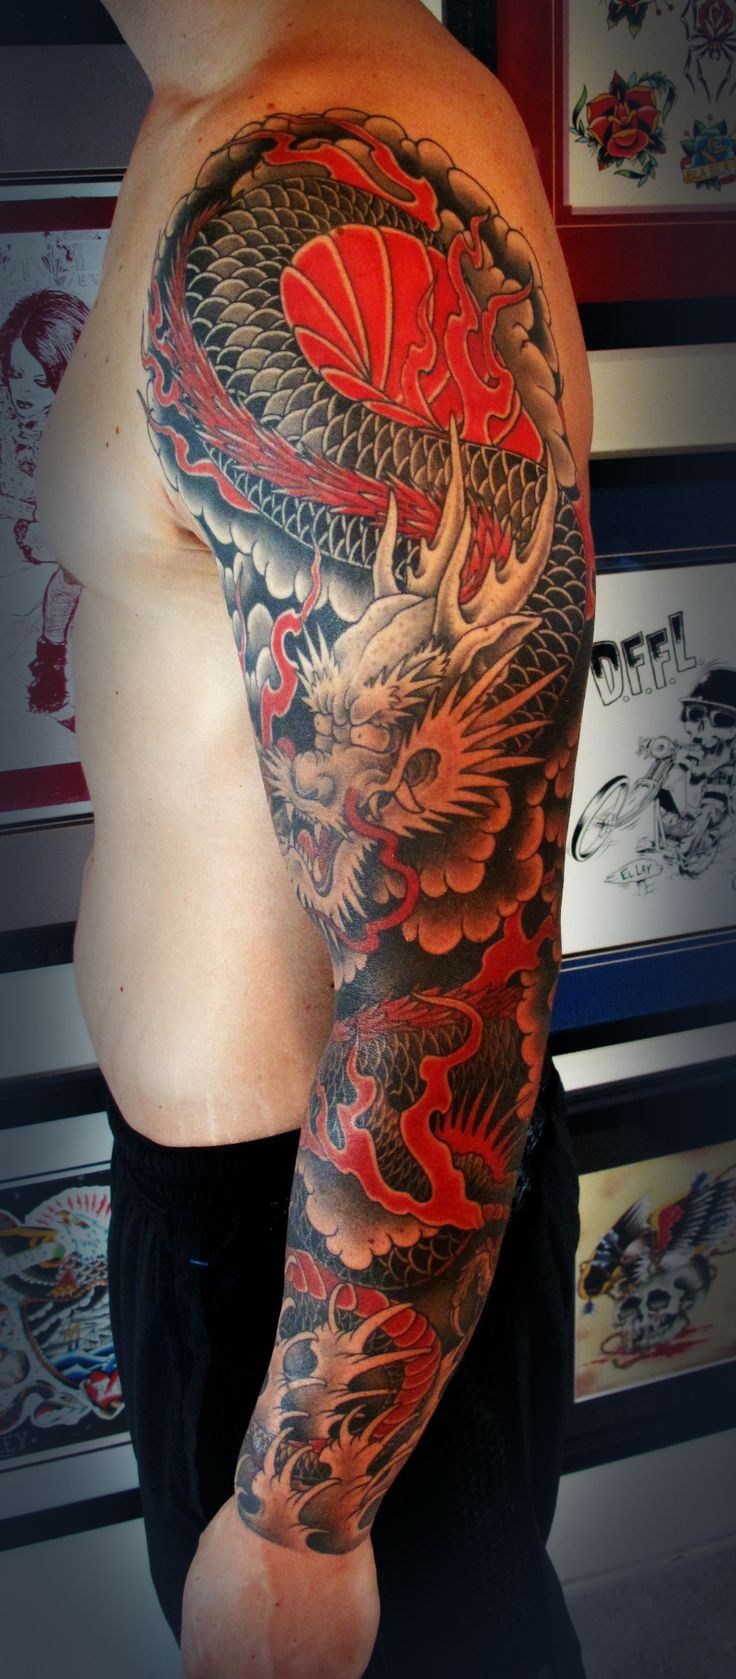 Japanese red dragon tattoo on whole arm - Japanese ReD Dragon Tattoo On Whole Arm